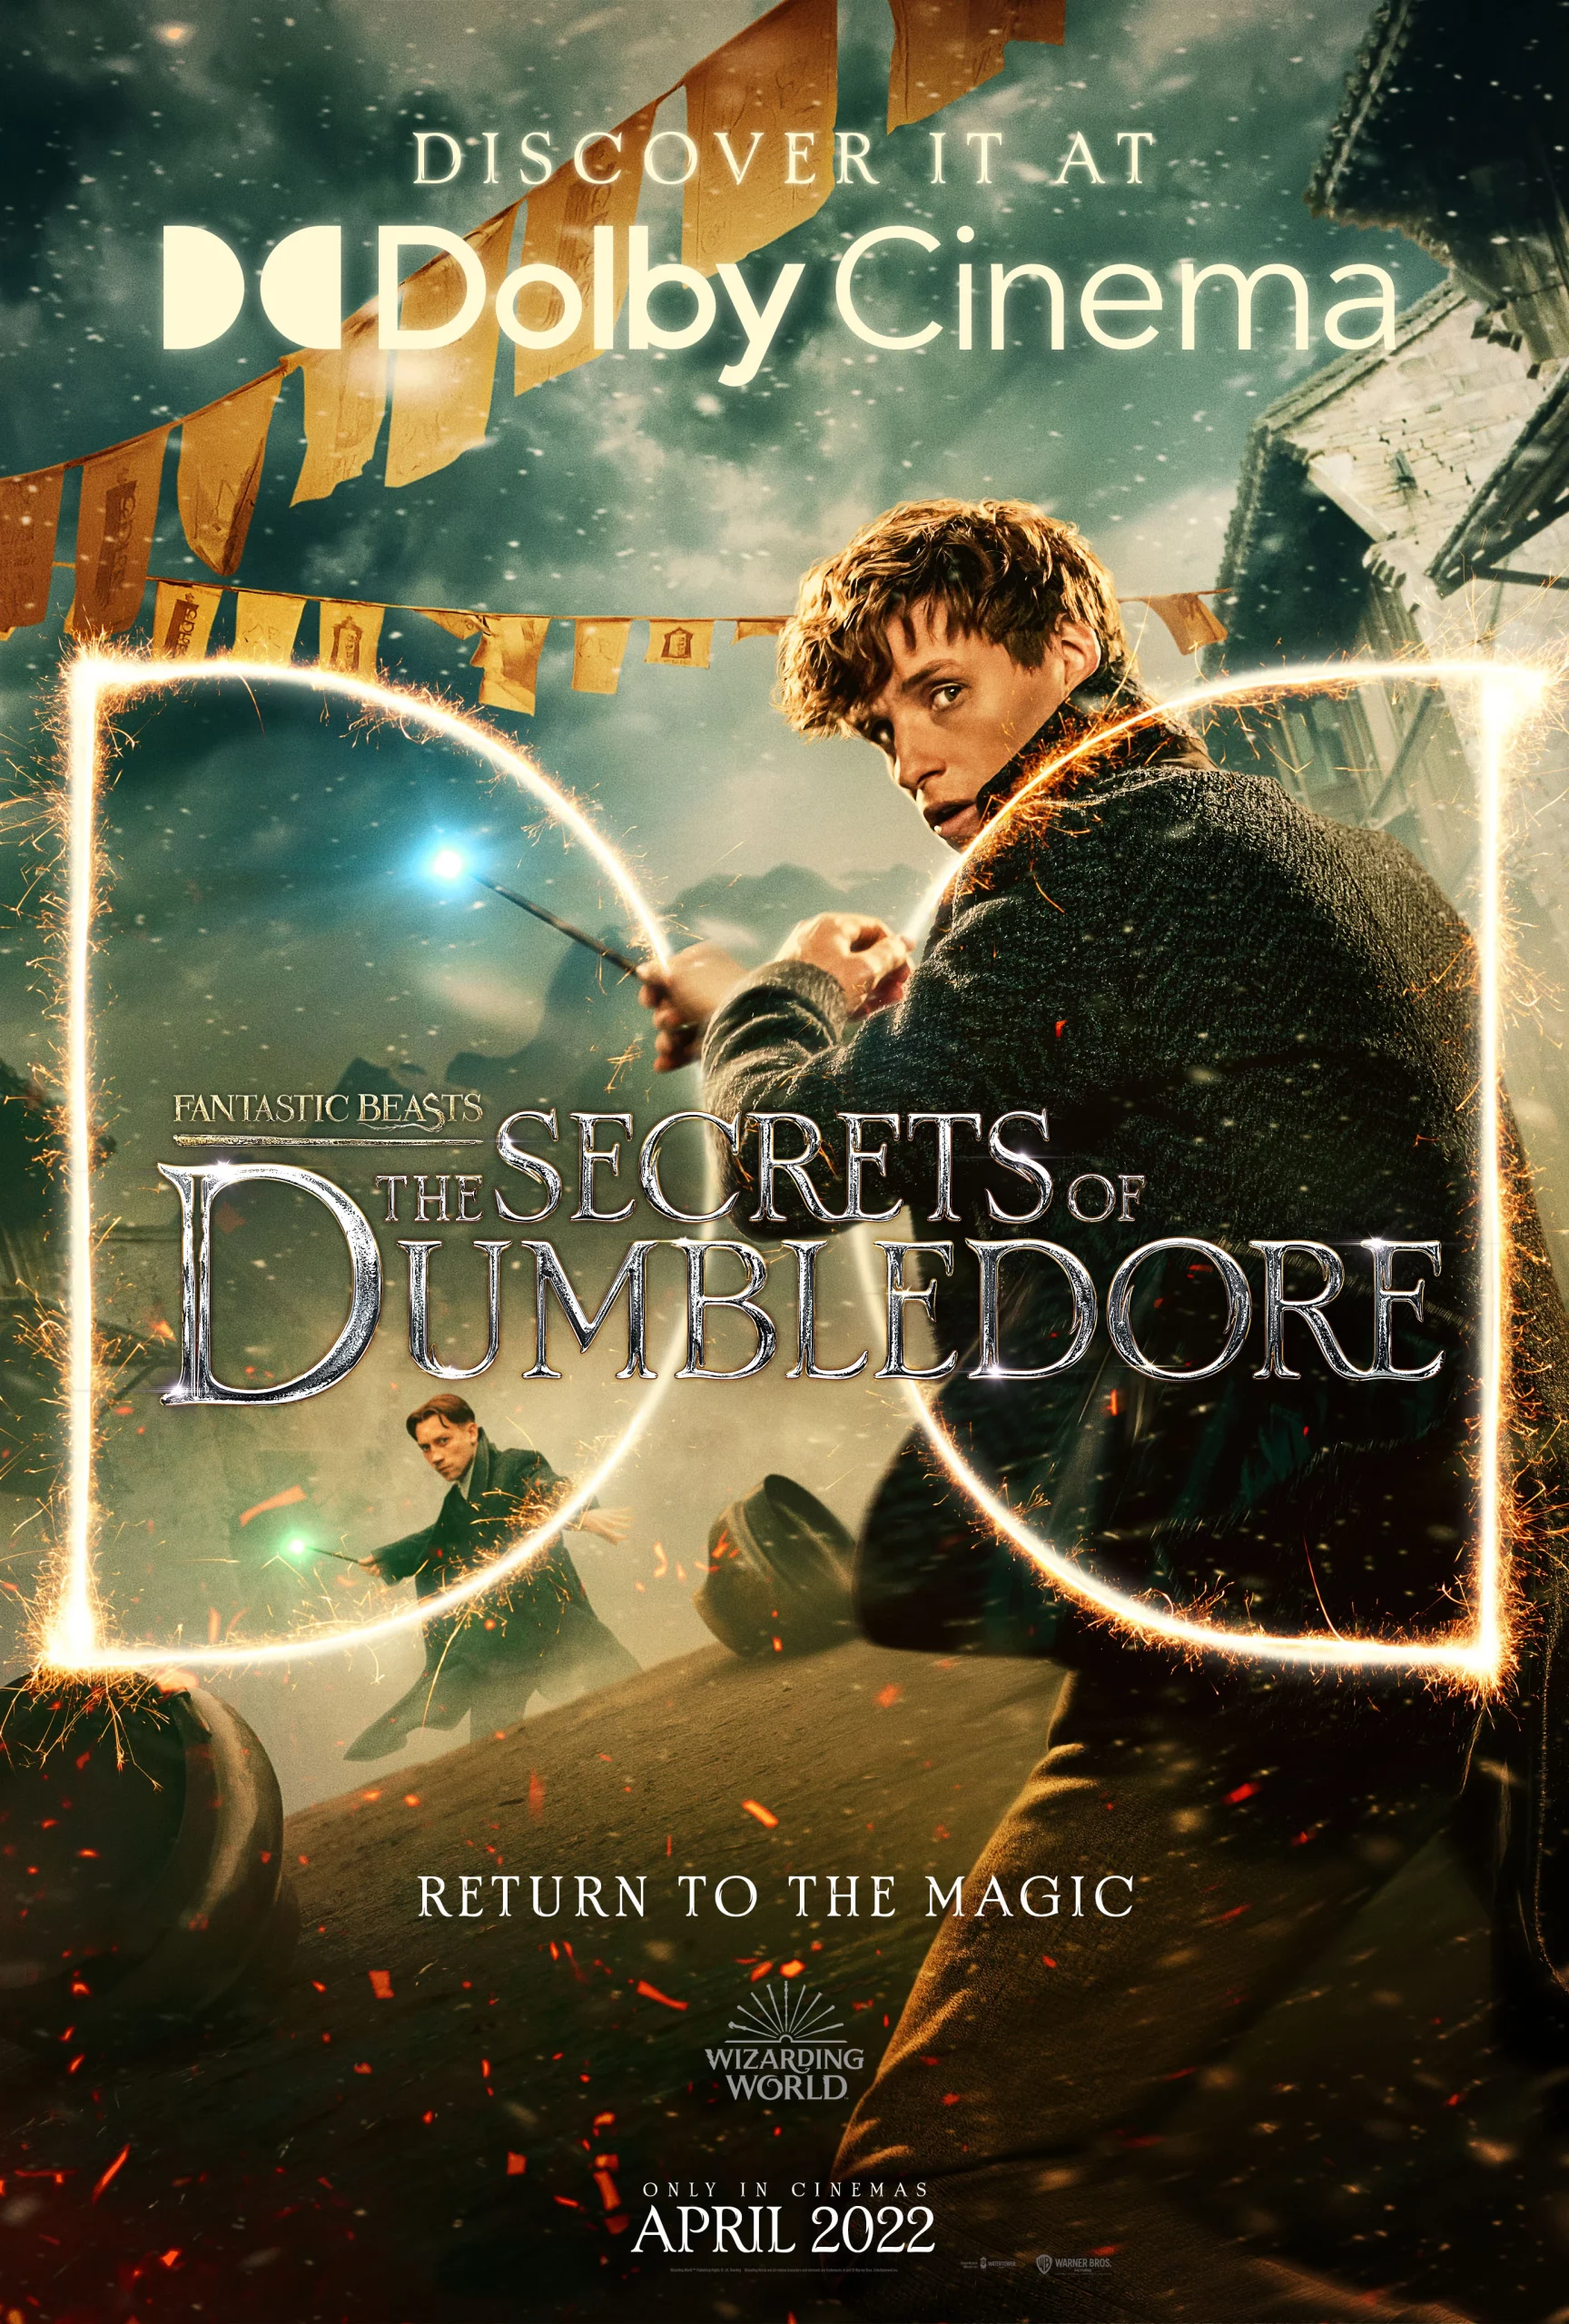 "Fantastic Beasts: The Secrets of Dumbledore" Releases Dolby Cinema, 4DX, ScreenX, D-Box Multi-Format Posters